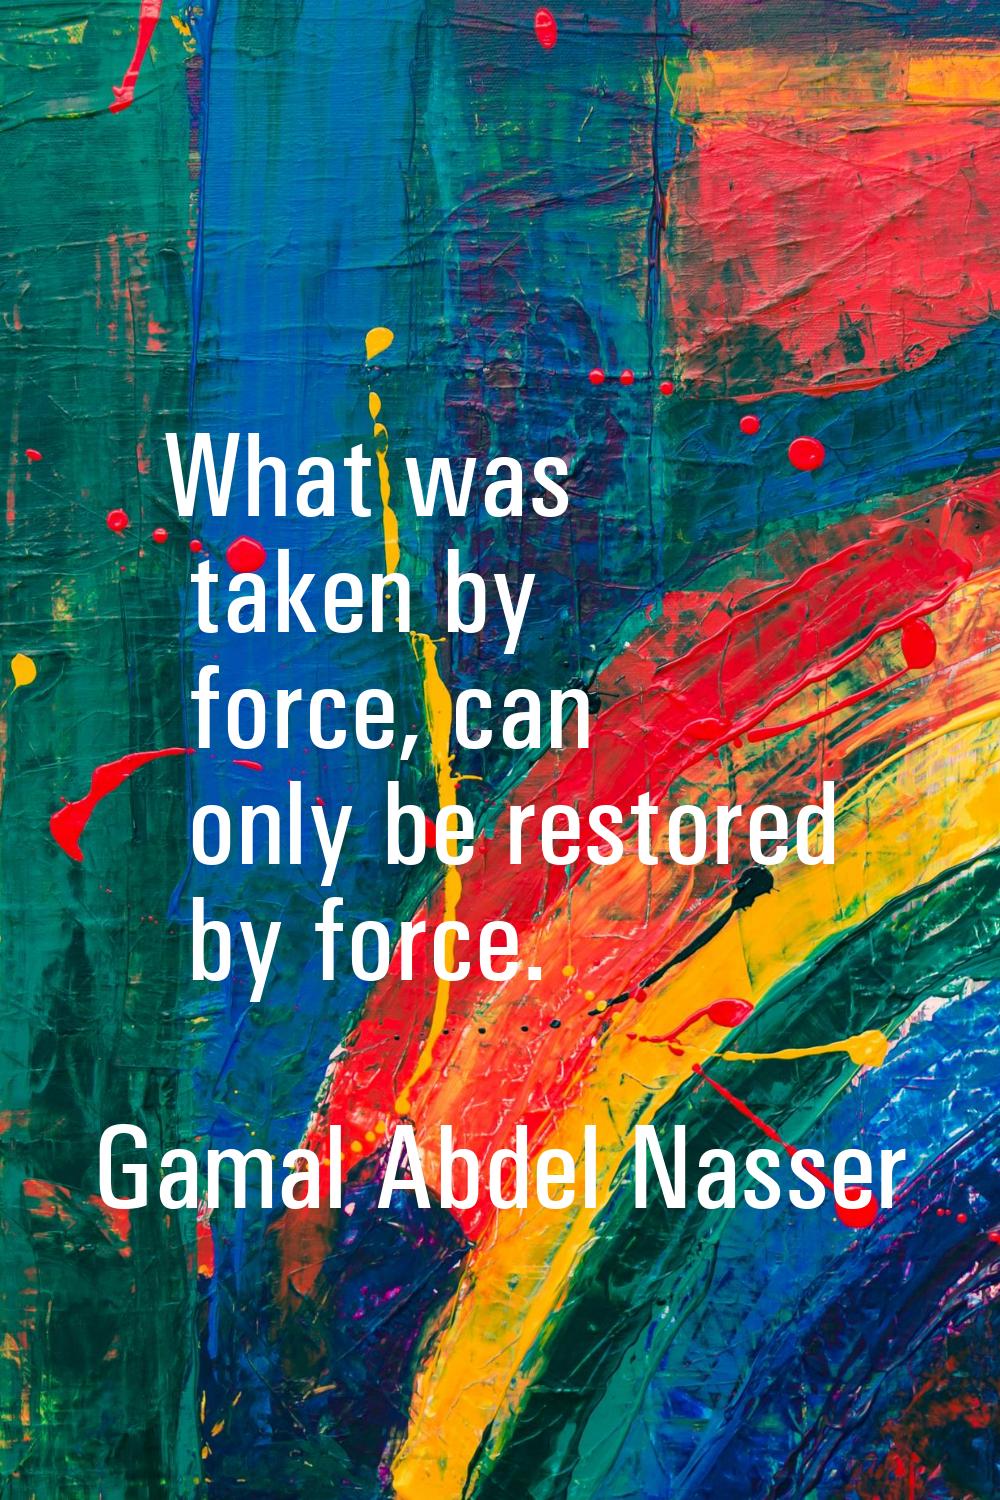 What was taken by force, can only be restored by force.